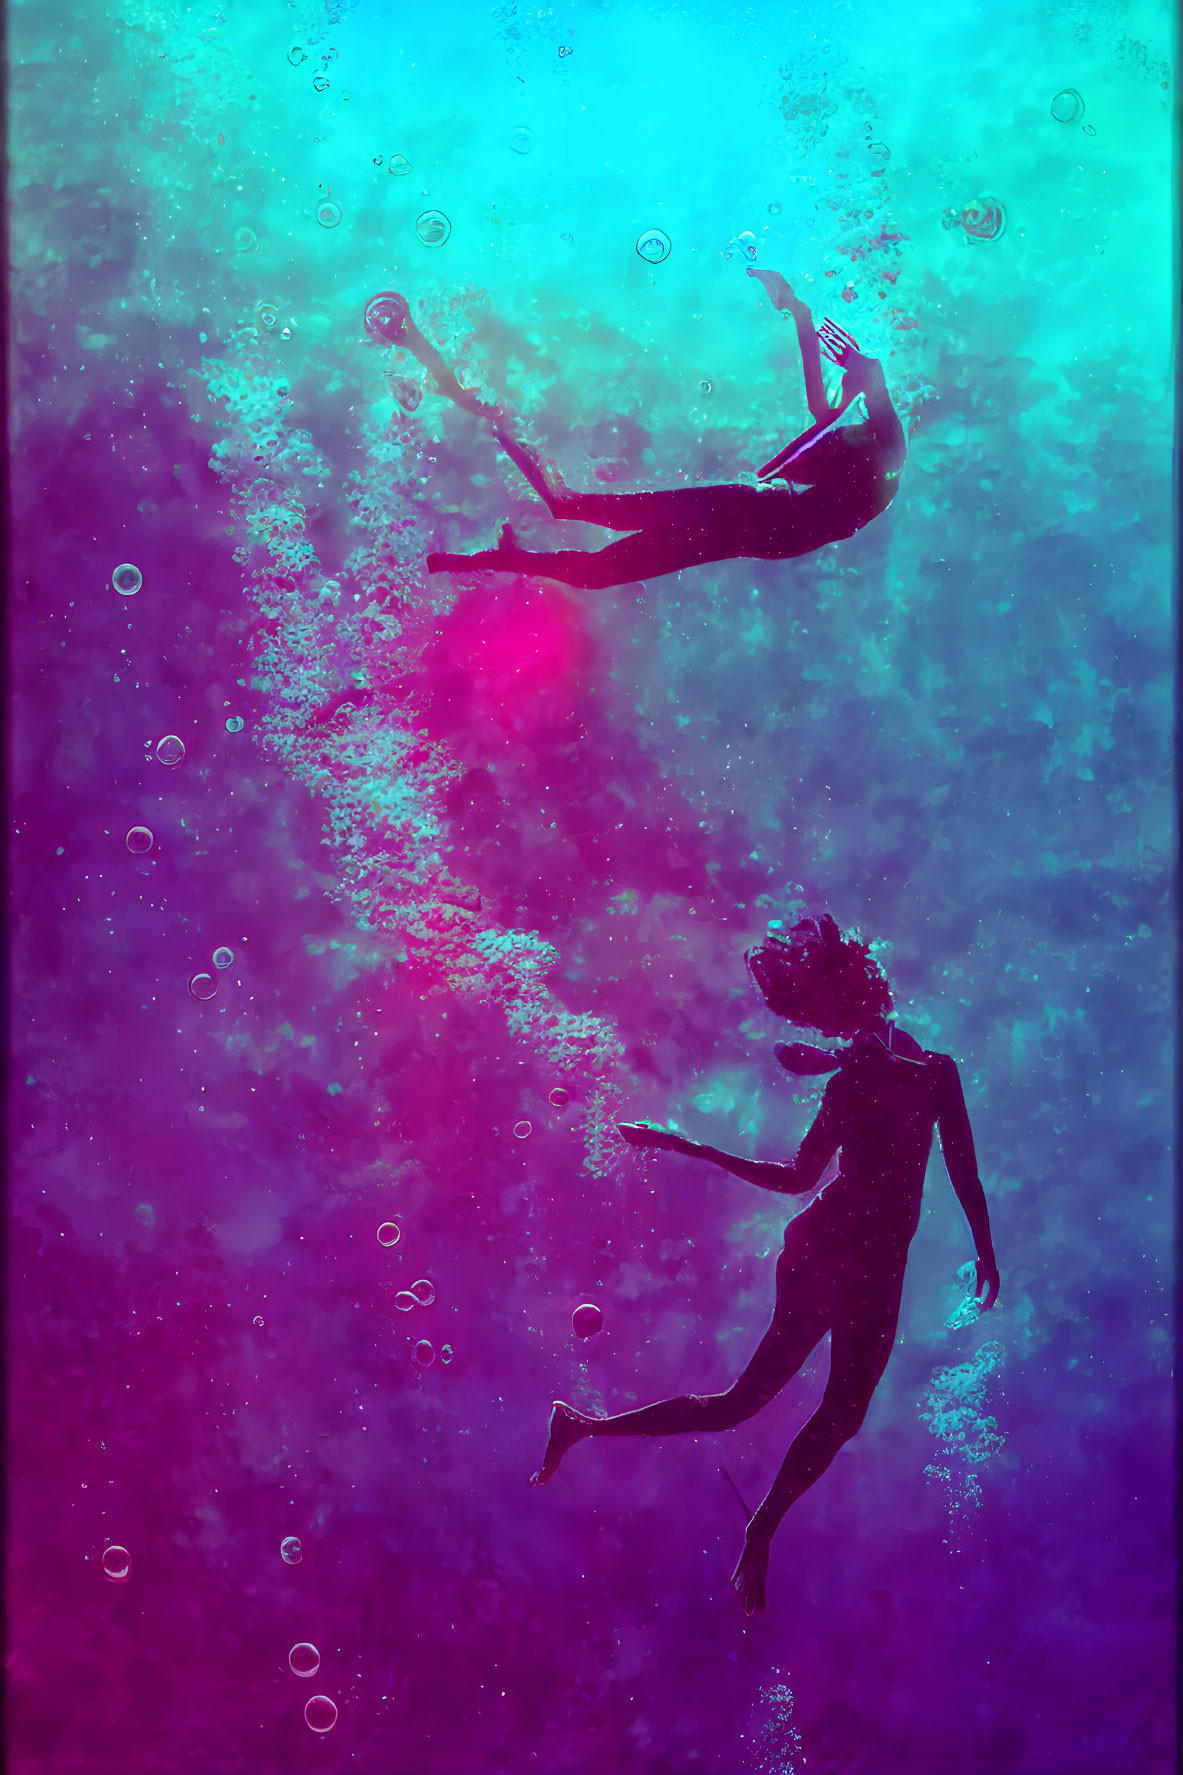 Underwater free divers surrounded by bubbles in purple to blue gradient